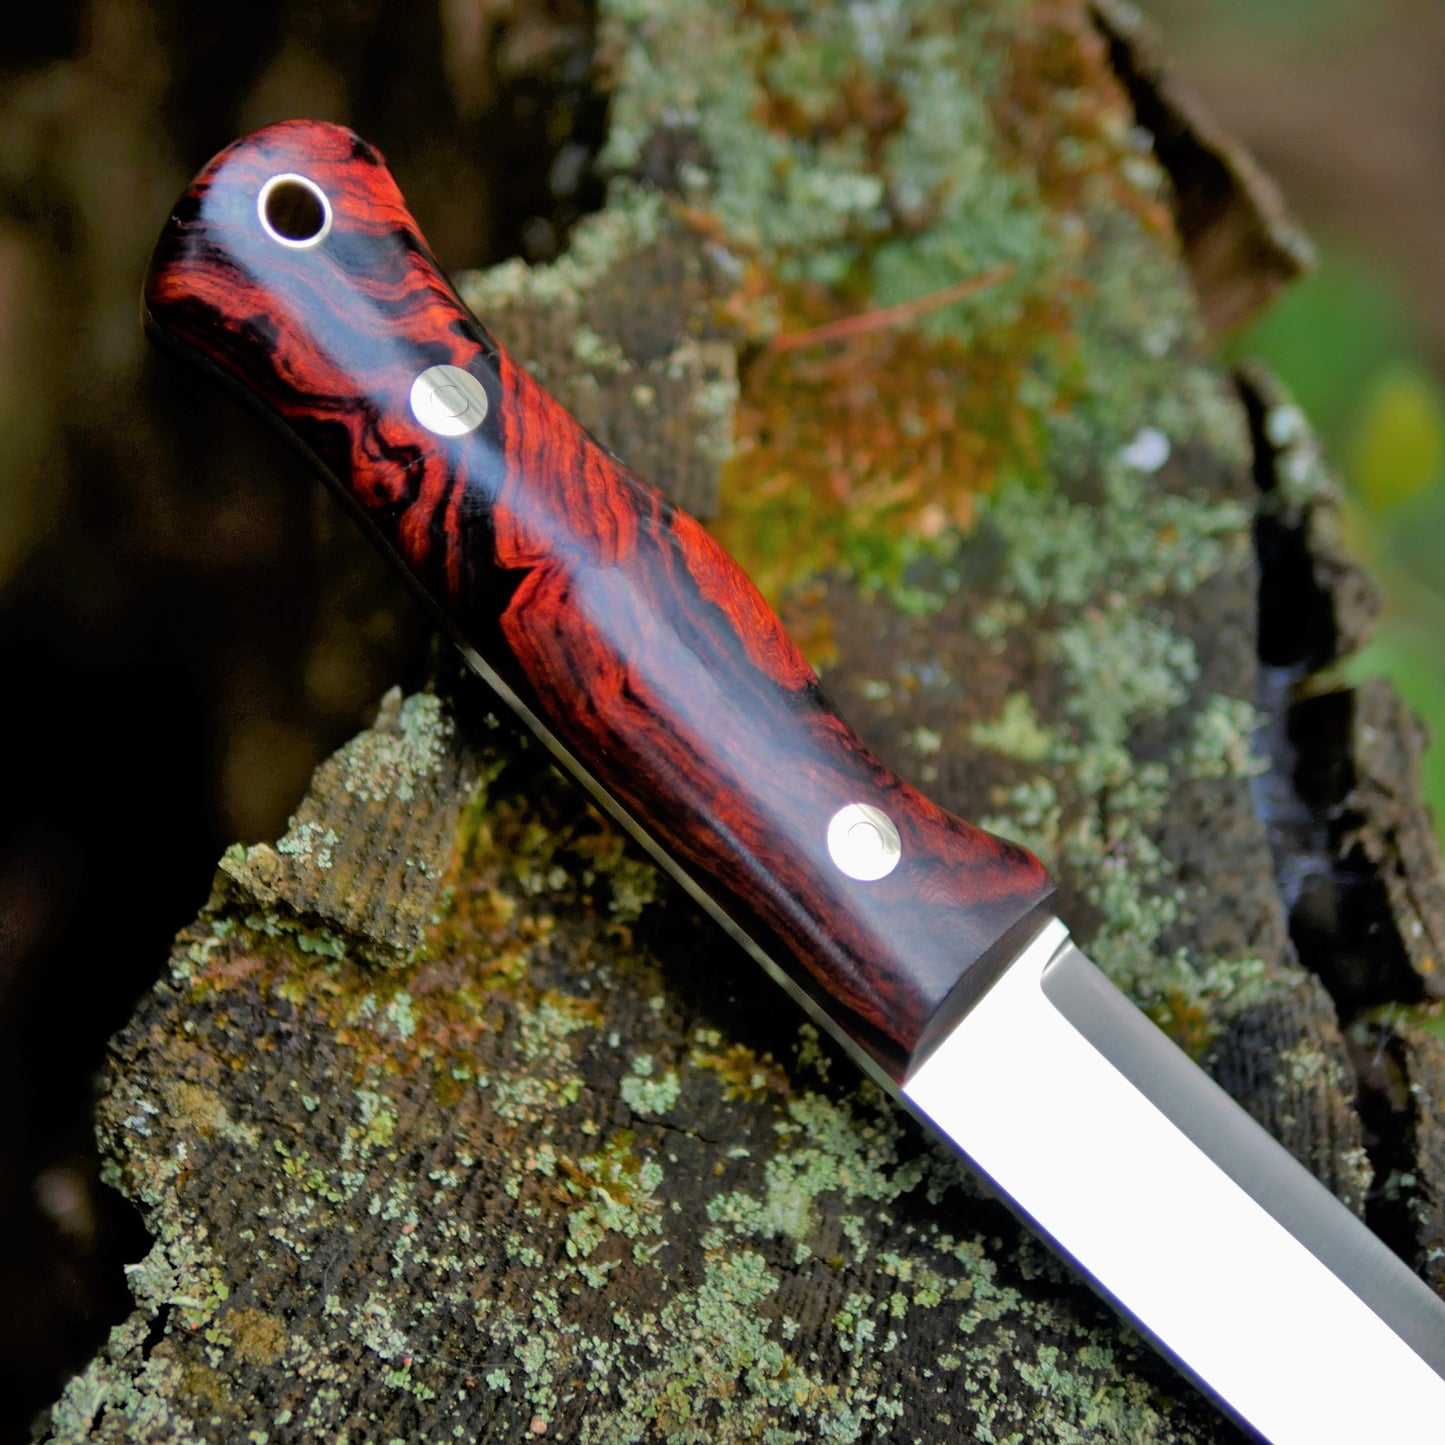 Explorer: 3V, Ironwood with Red G10 Liners